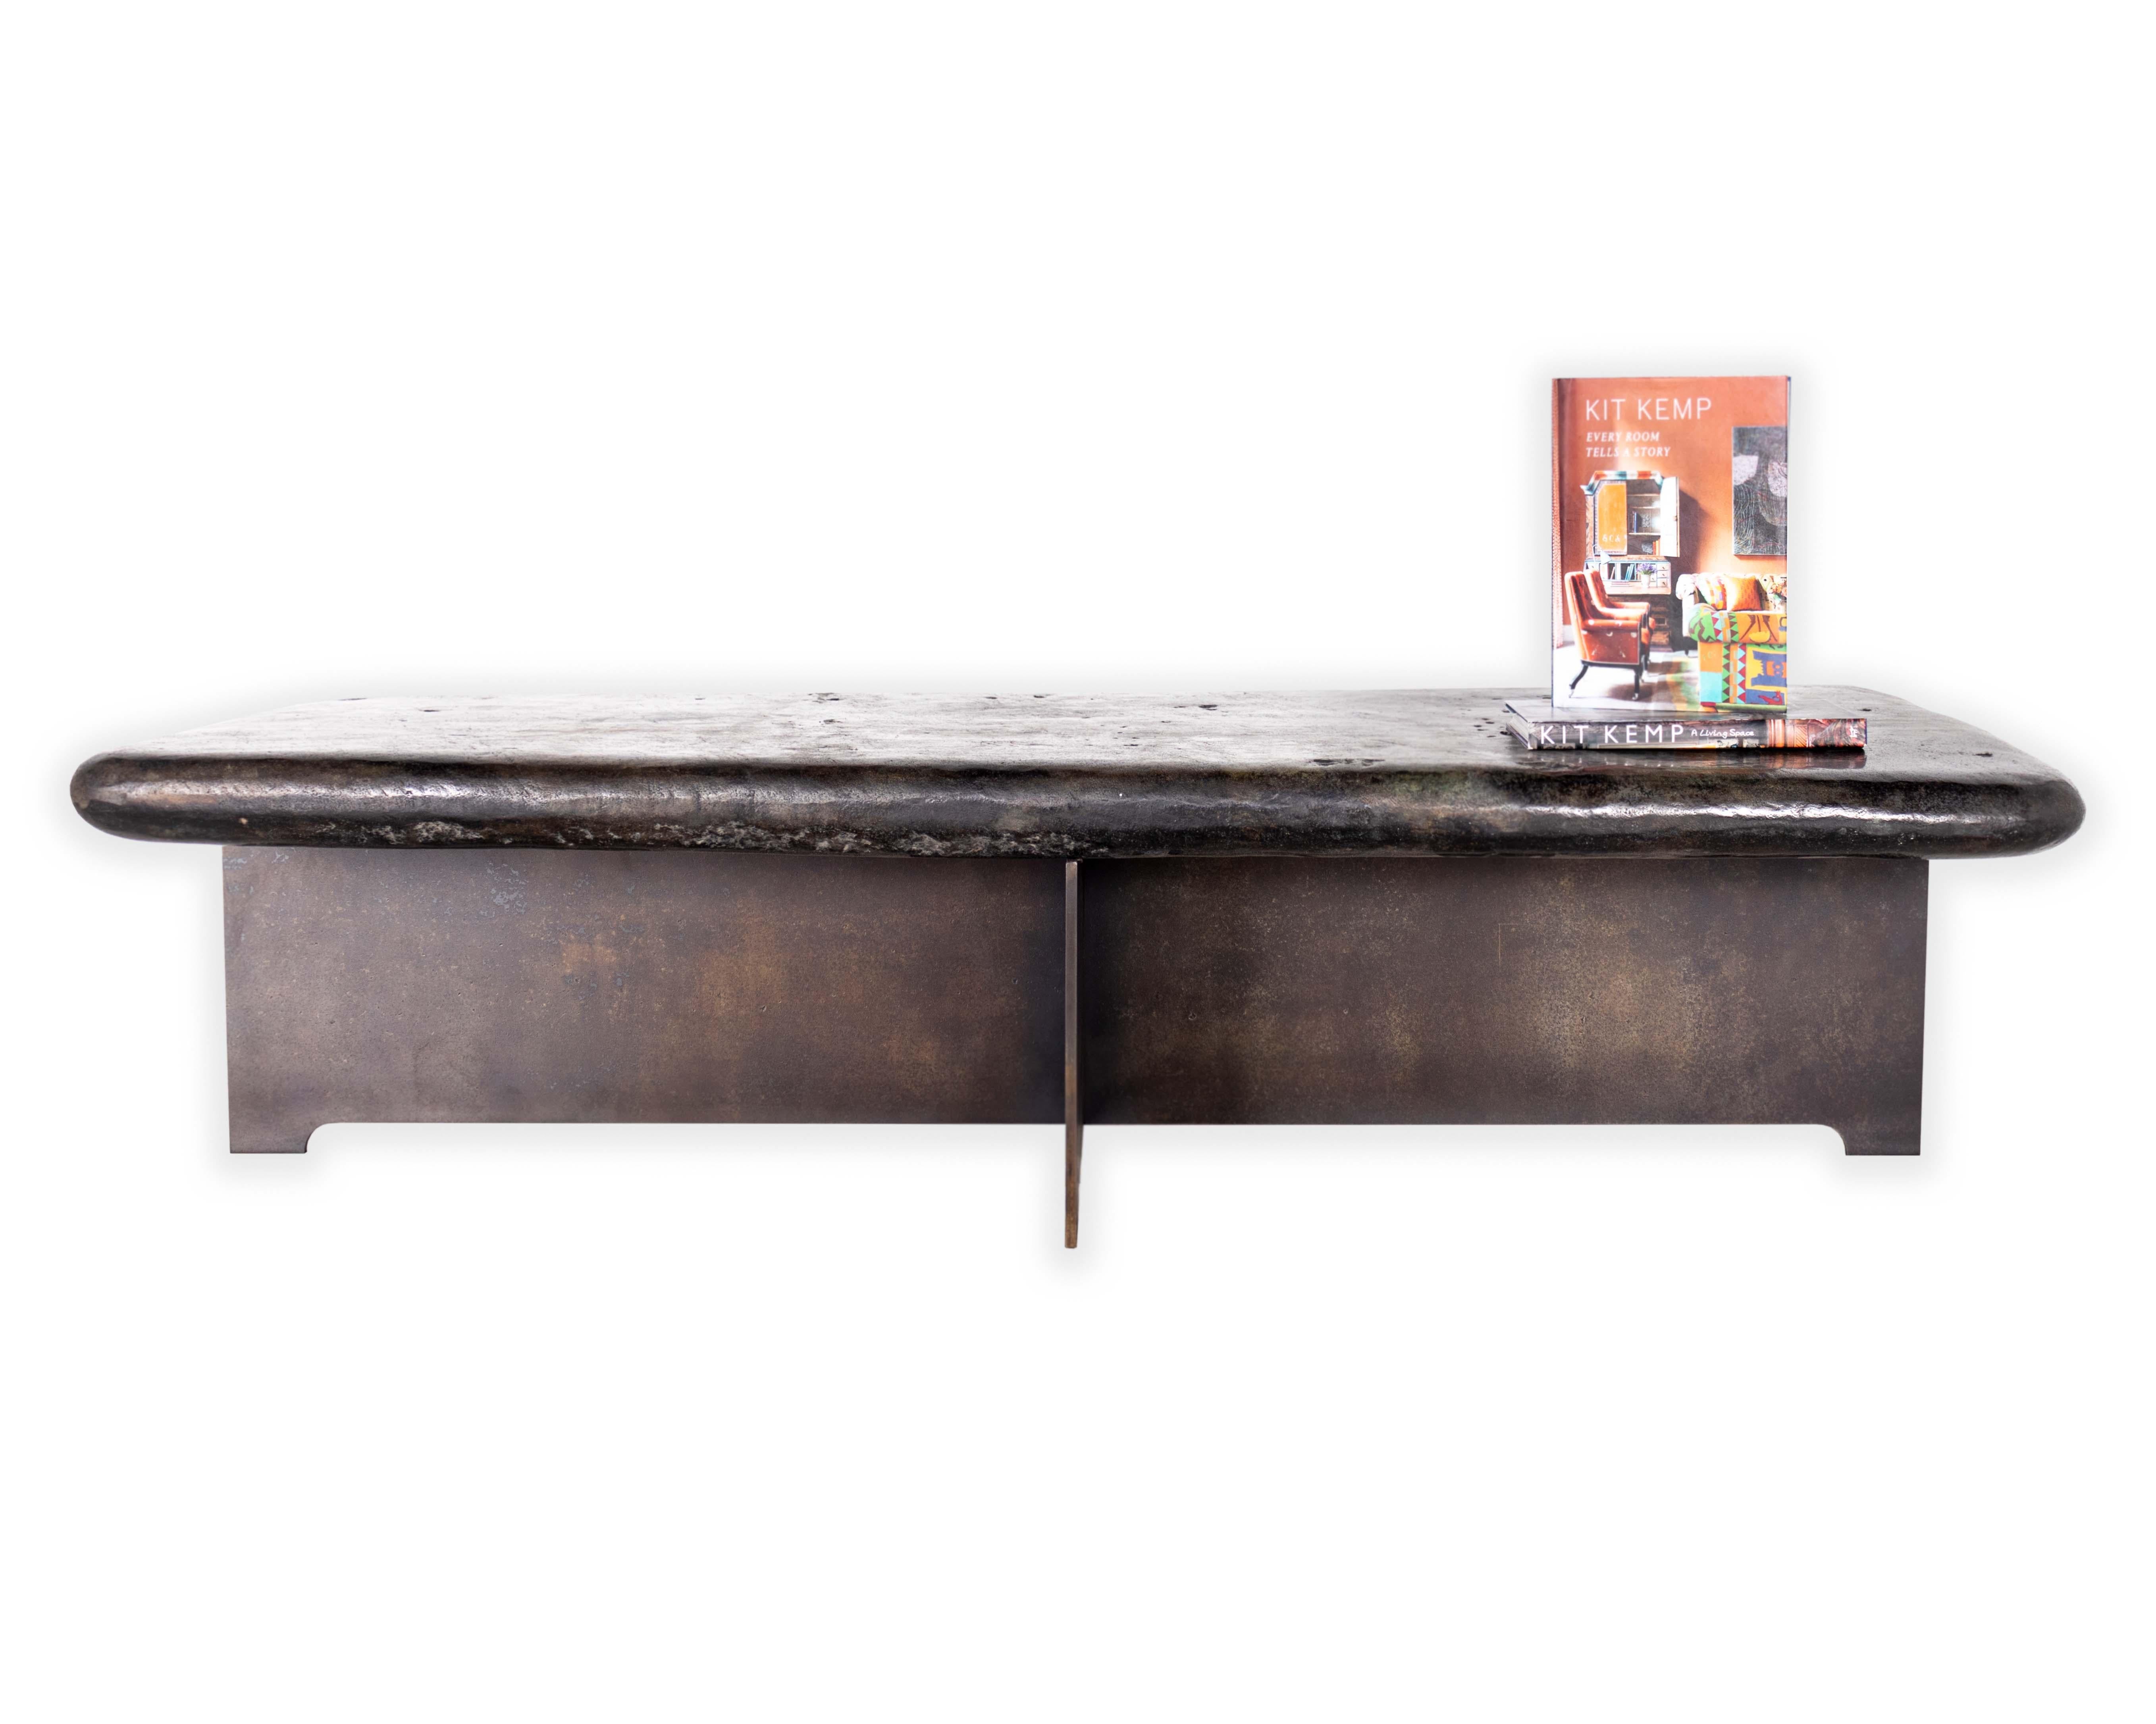 Contemporary Balinese Hand Wrought River Stone Coffee Table on Steel Mount